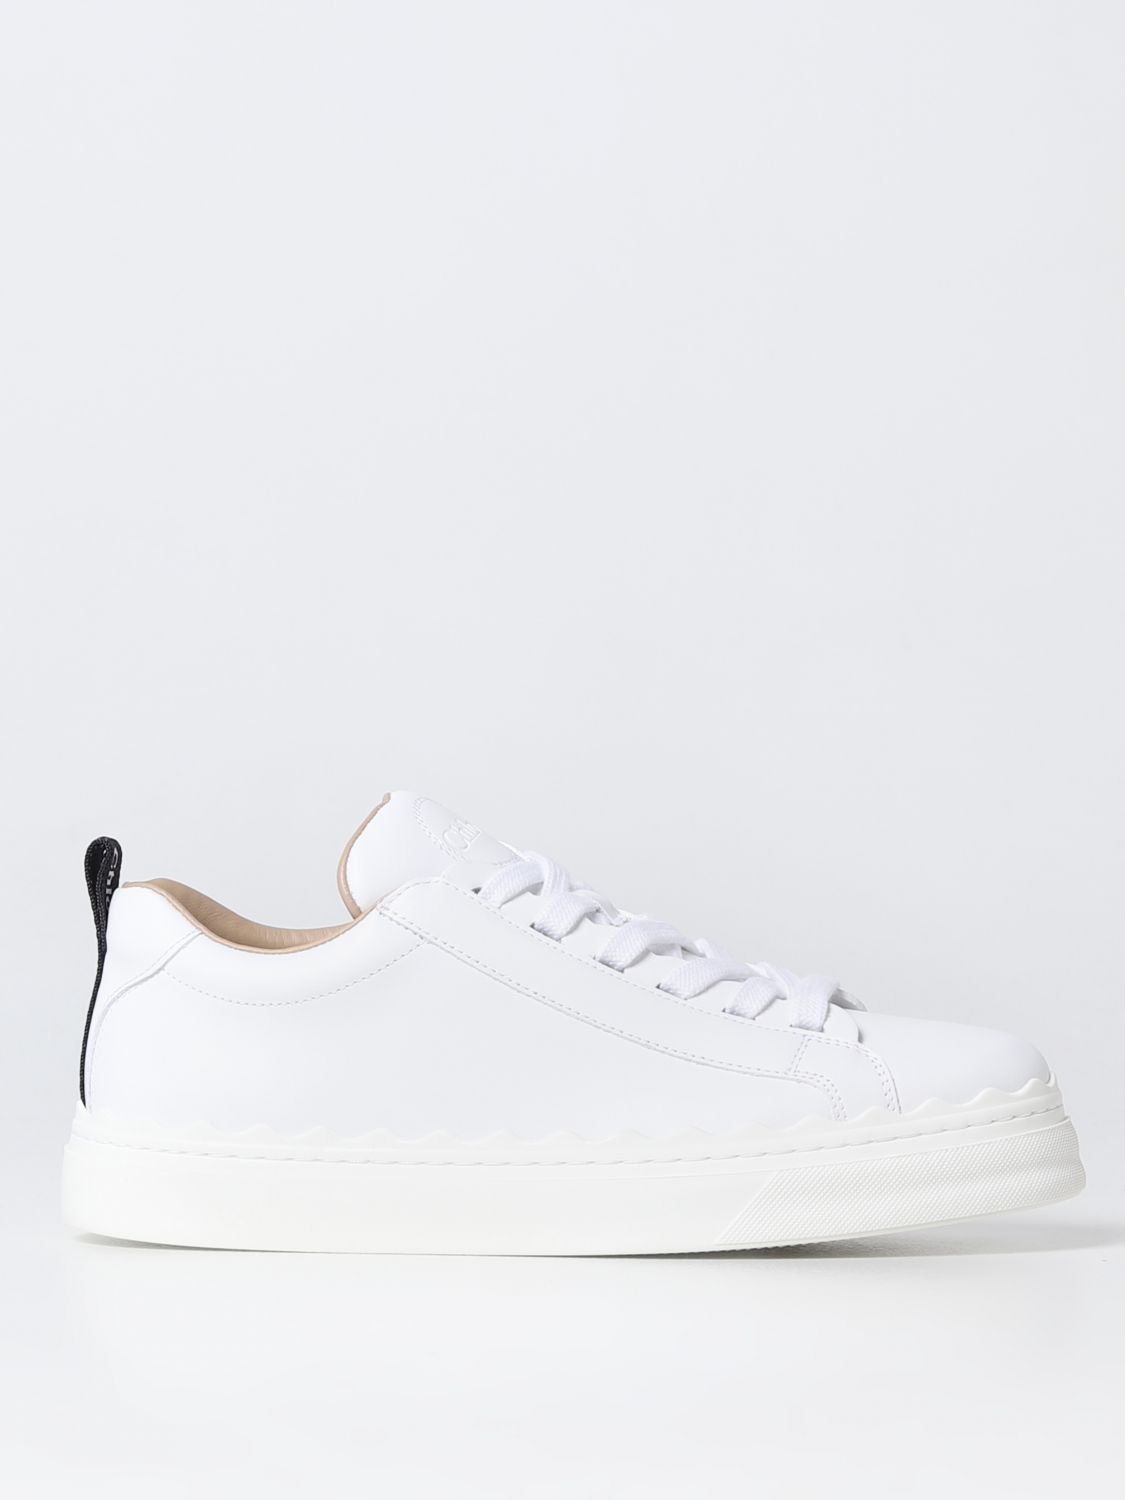 Chloé Sneakers In Leather In White